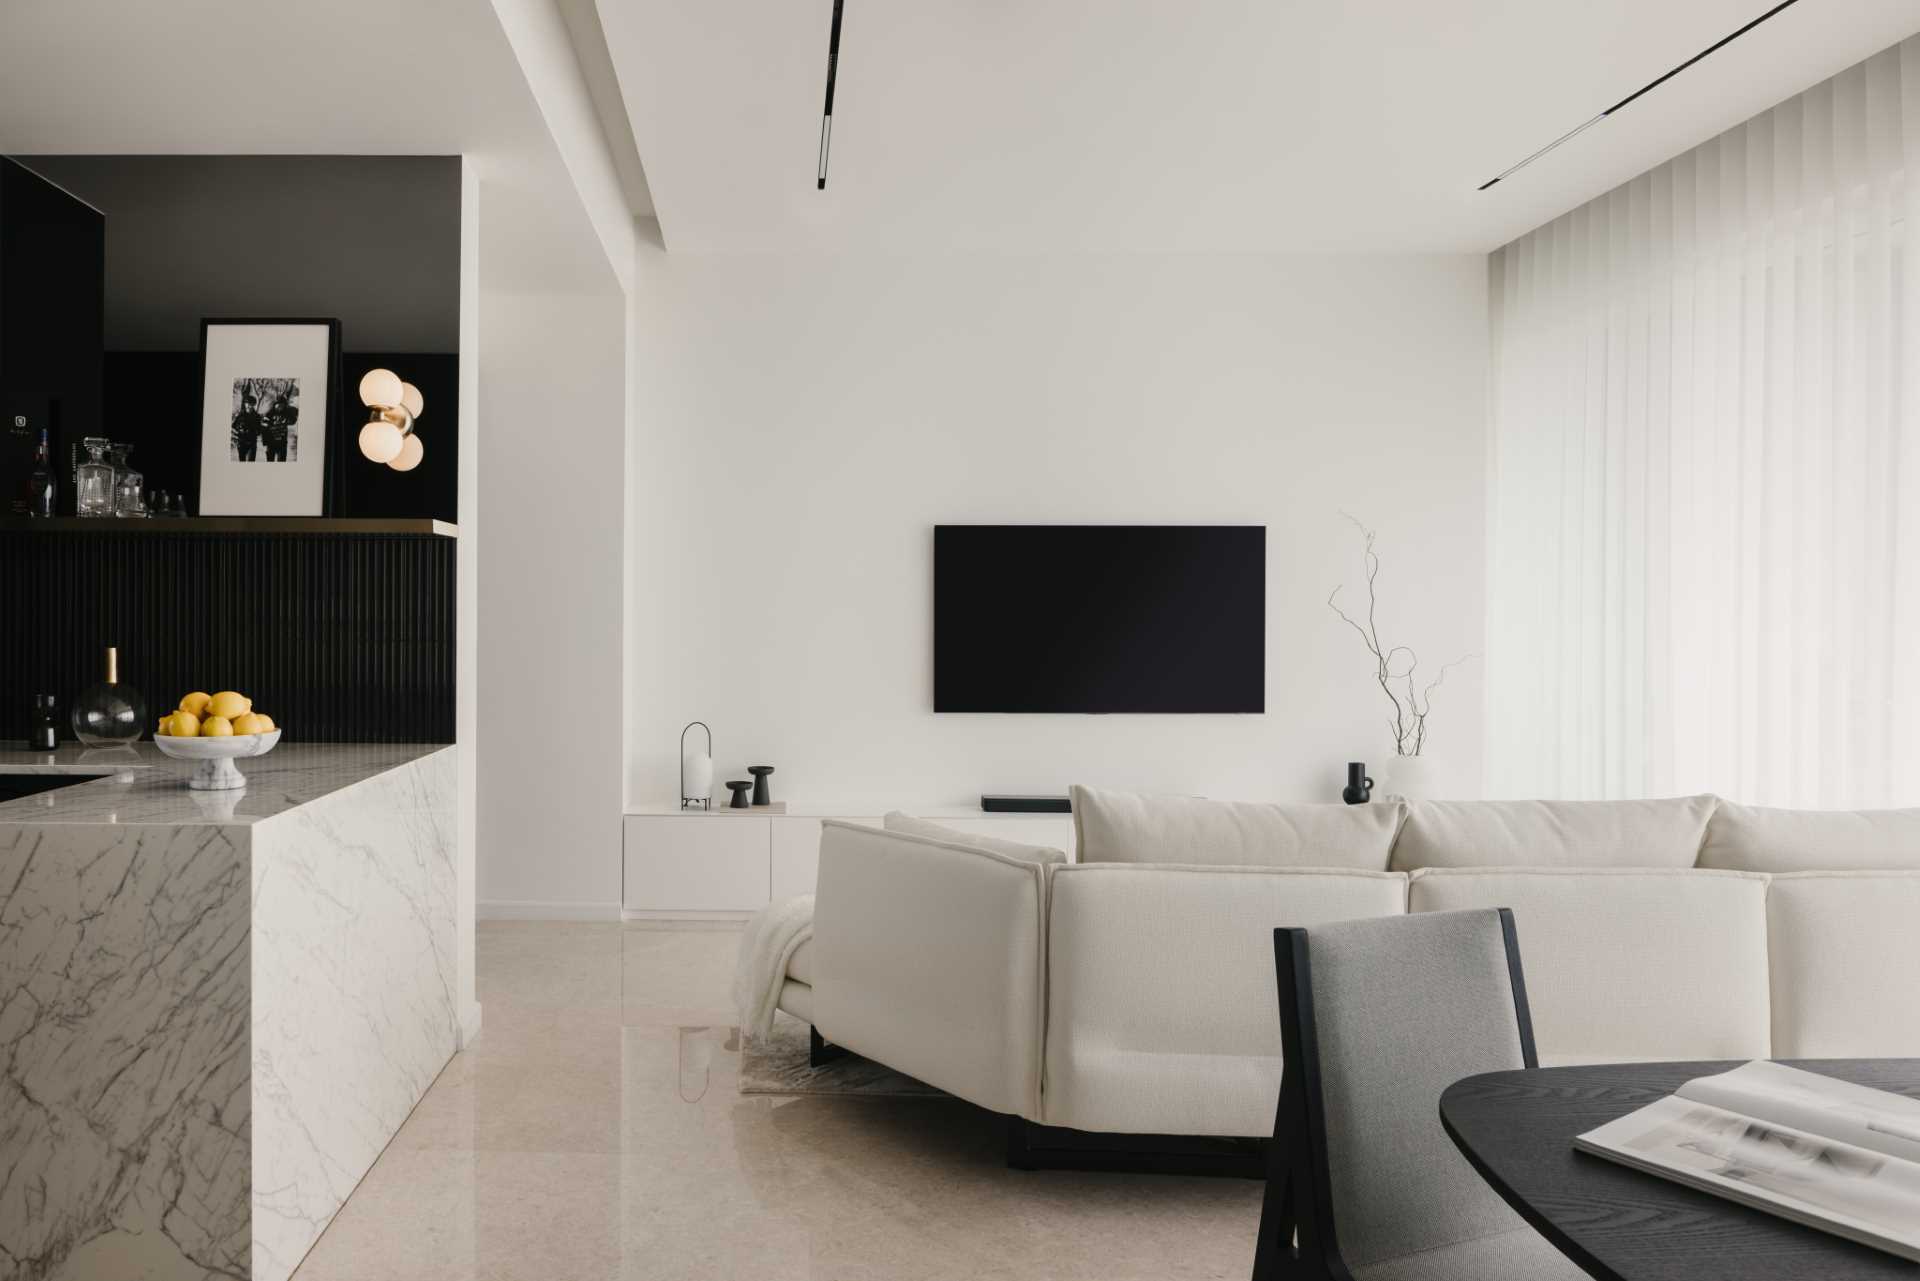 This monochrome living room strikes a balance of light and dark, where a white couch with a mat،g throw blanket is paired with a black coffee table and TV.